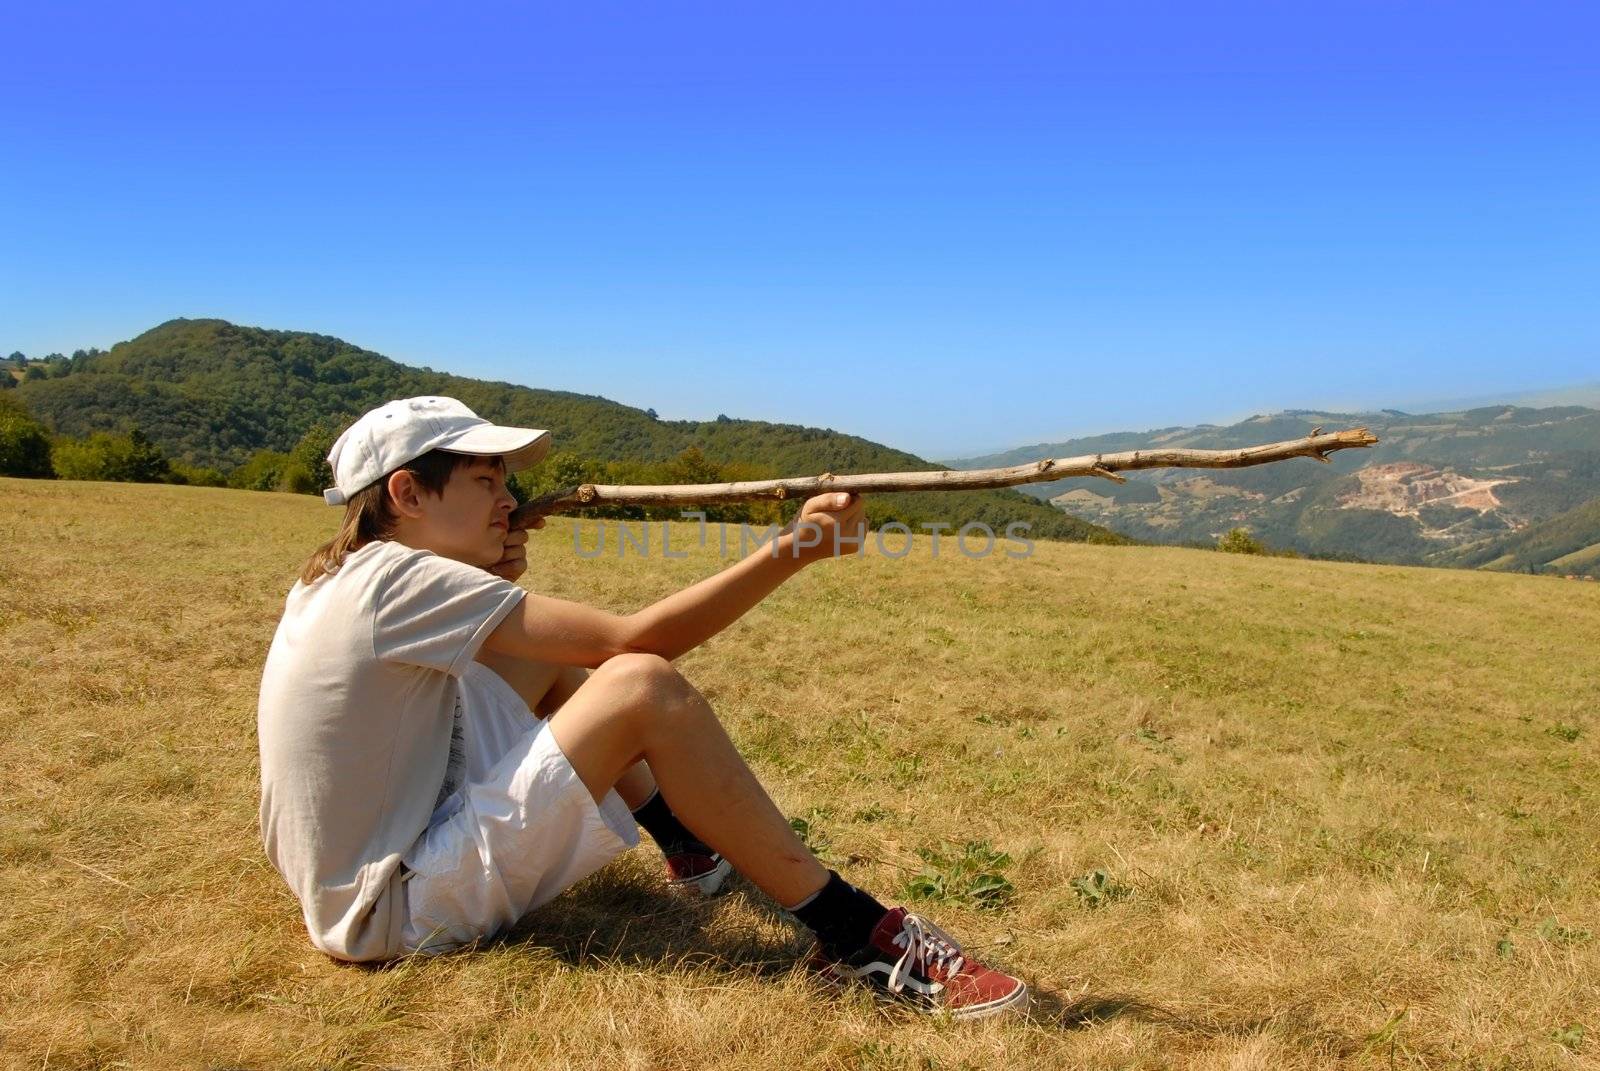 boy sitting on mountain meadow aiming with a stick as a gun